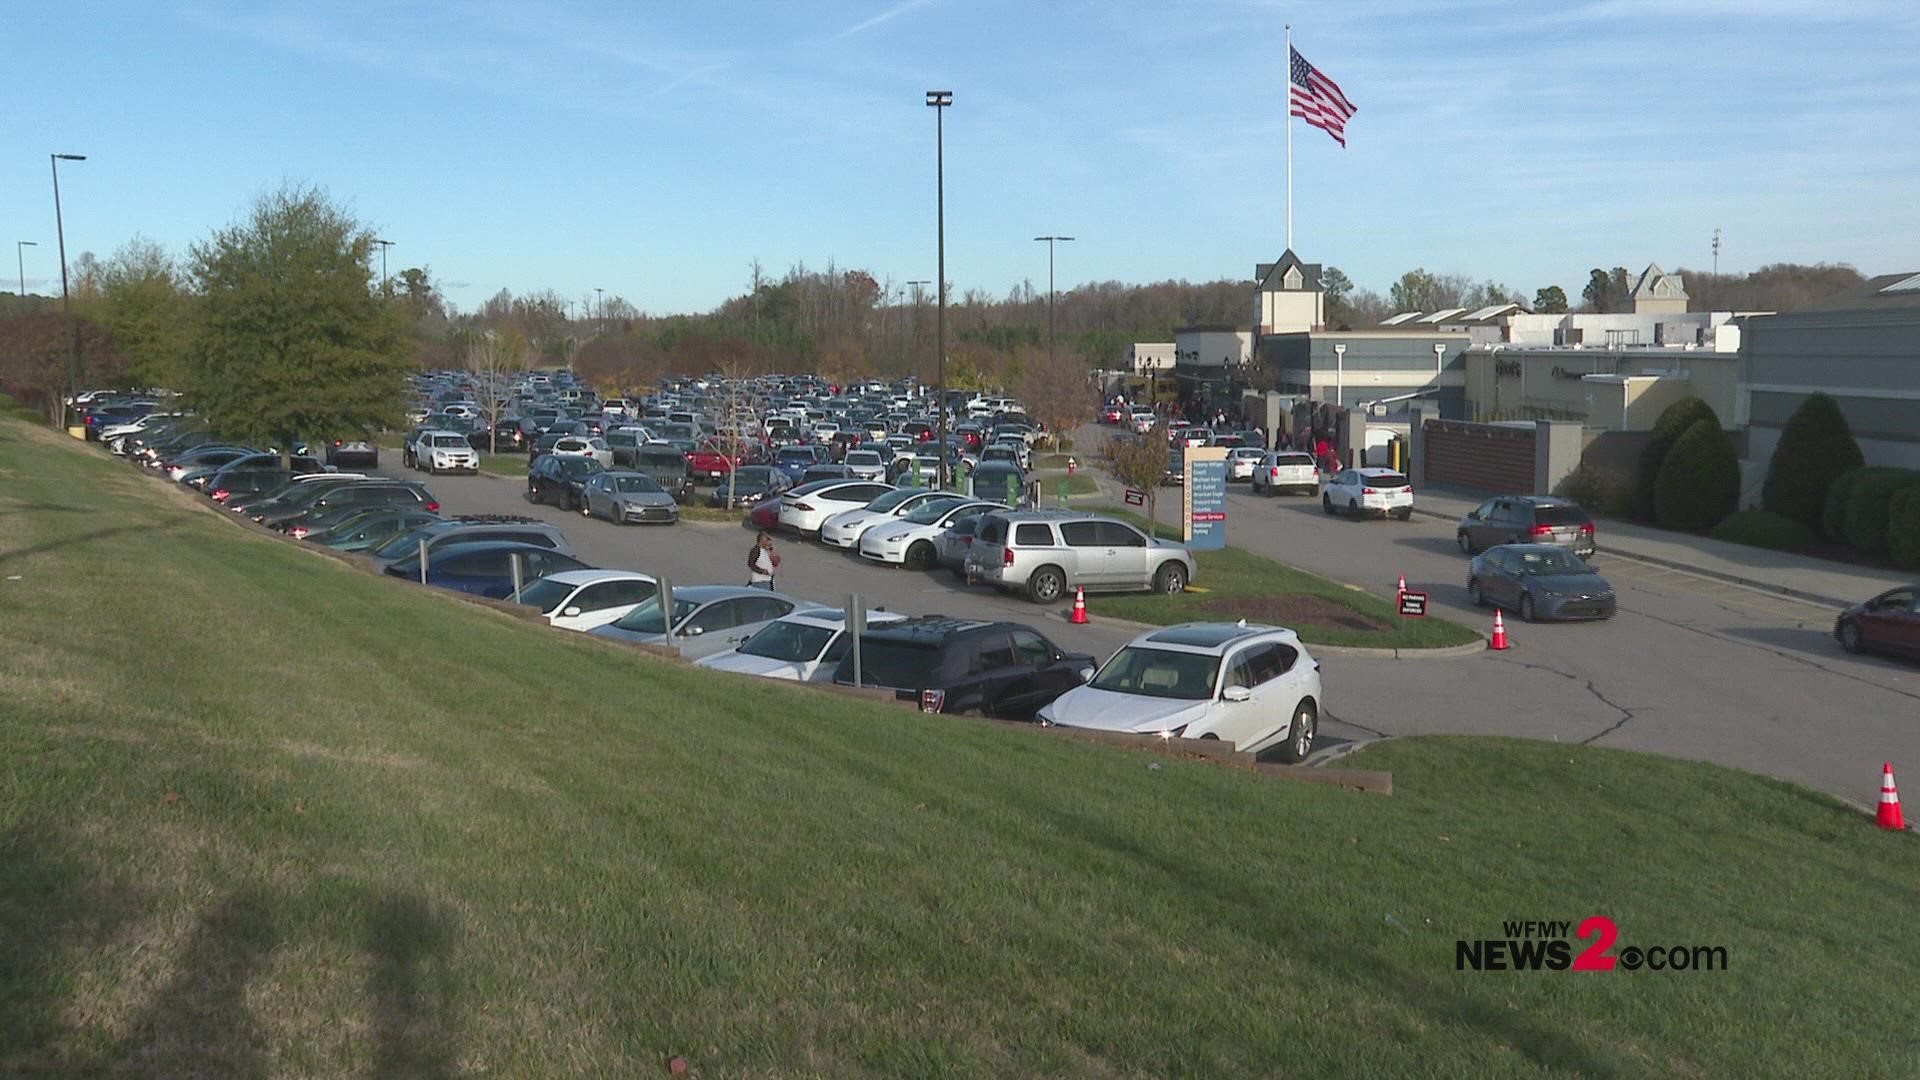 Black Friday shopping may not be losing its popularity in places like the Tanger Outlet shopping center in Mebane, NC.